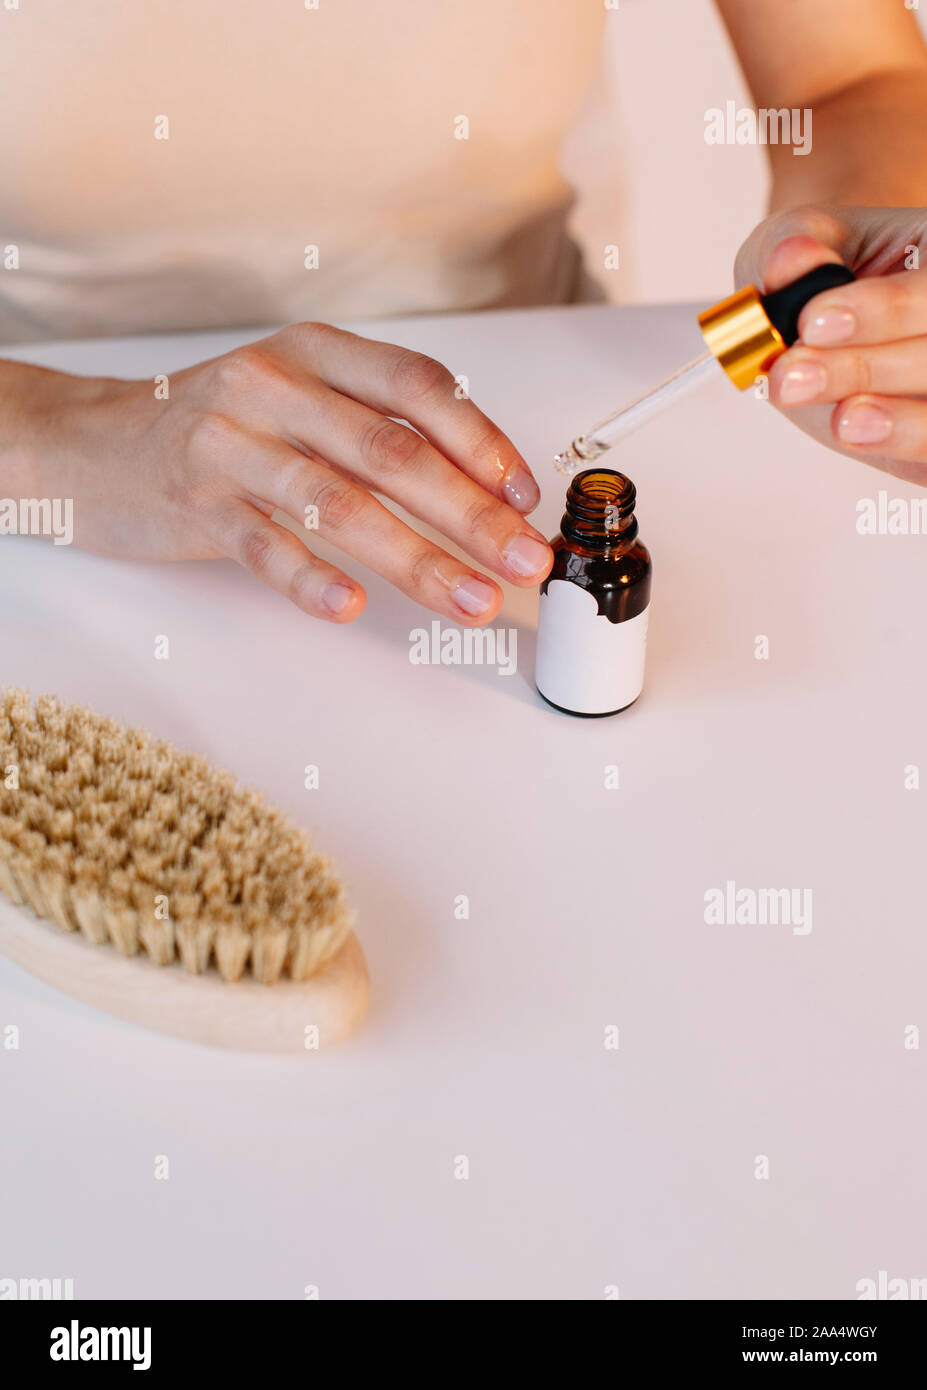 Woman applying cuticle oil to her nails Stock Photo